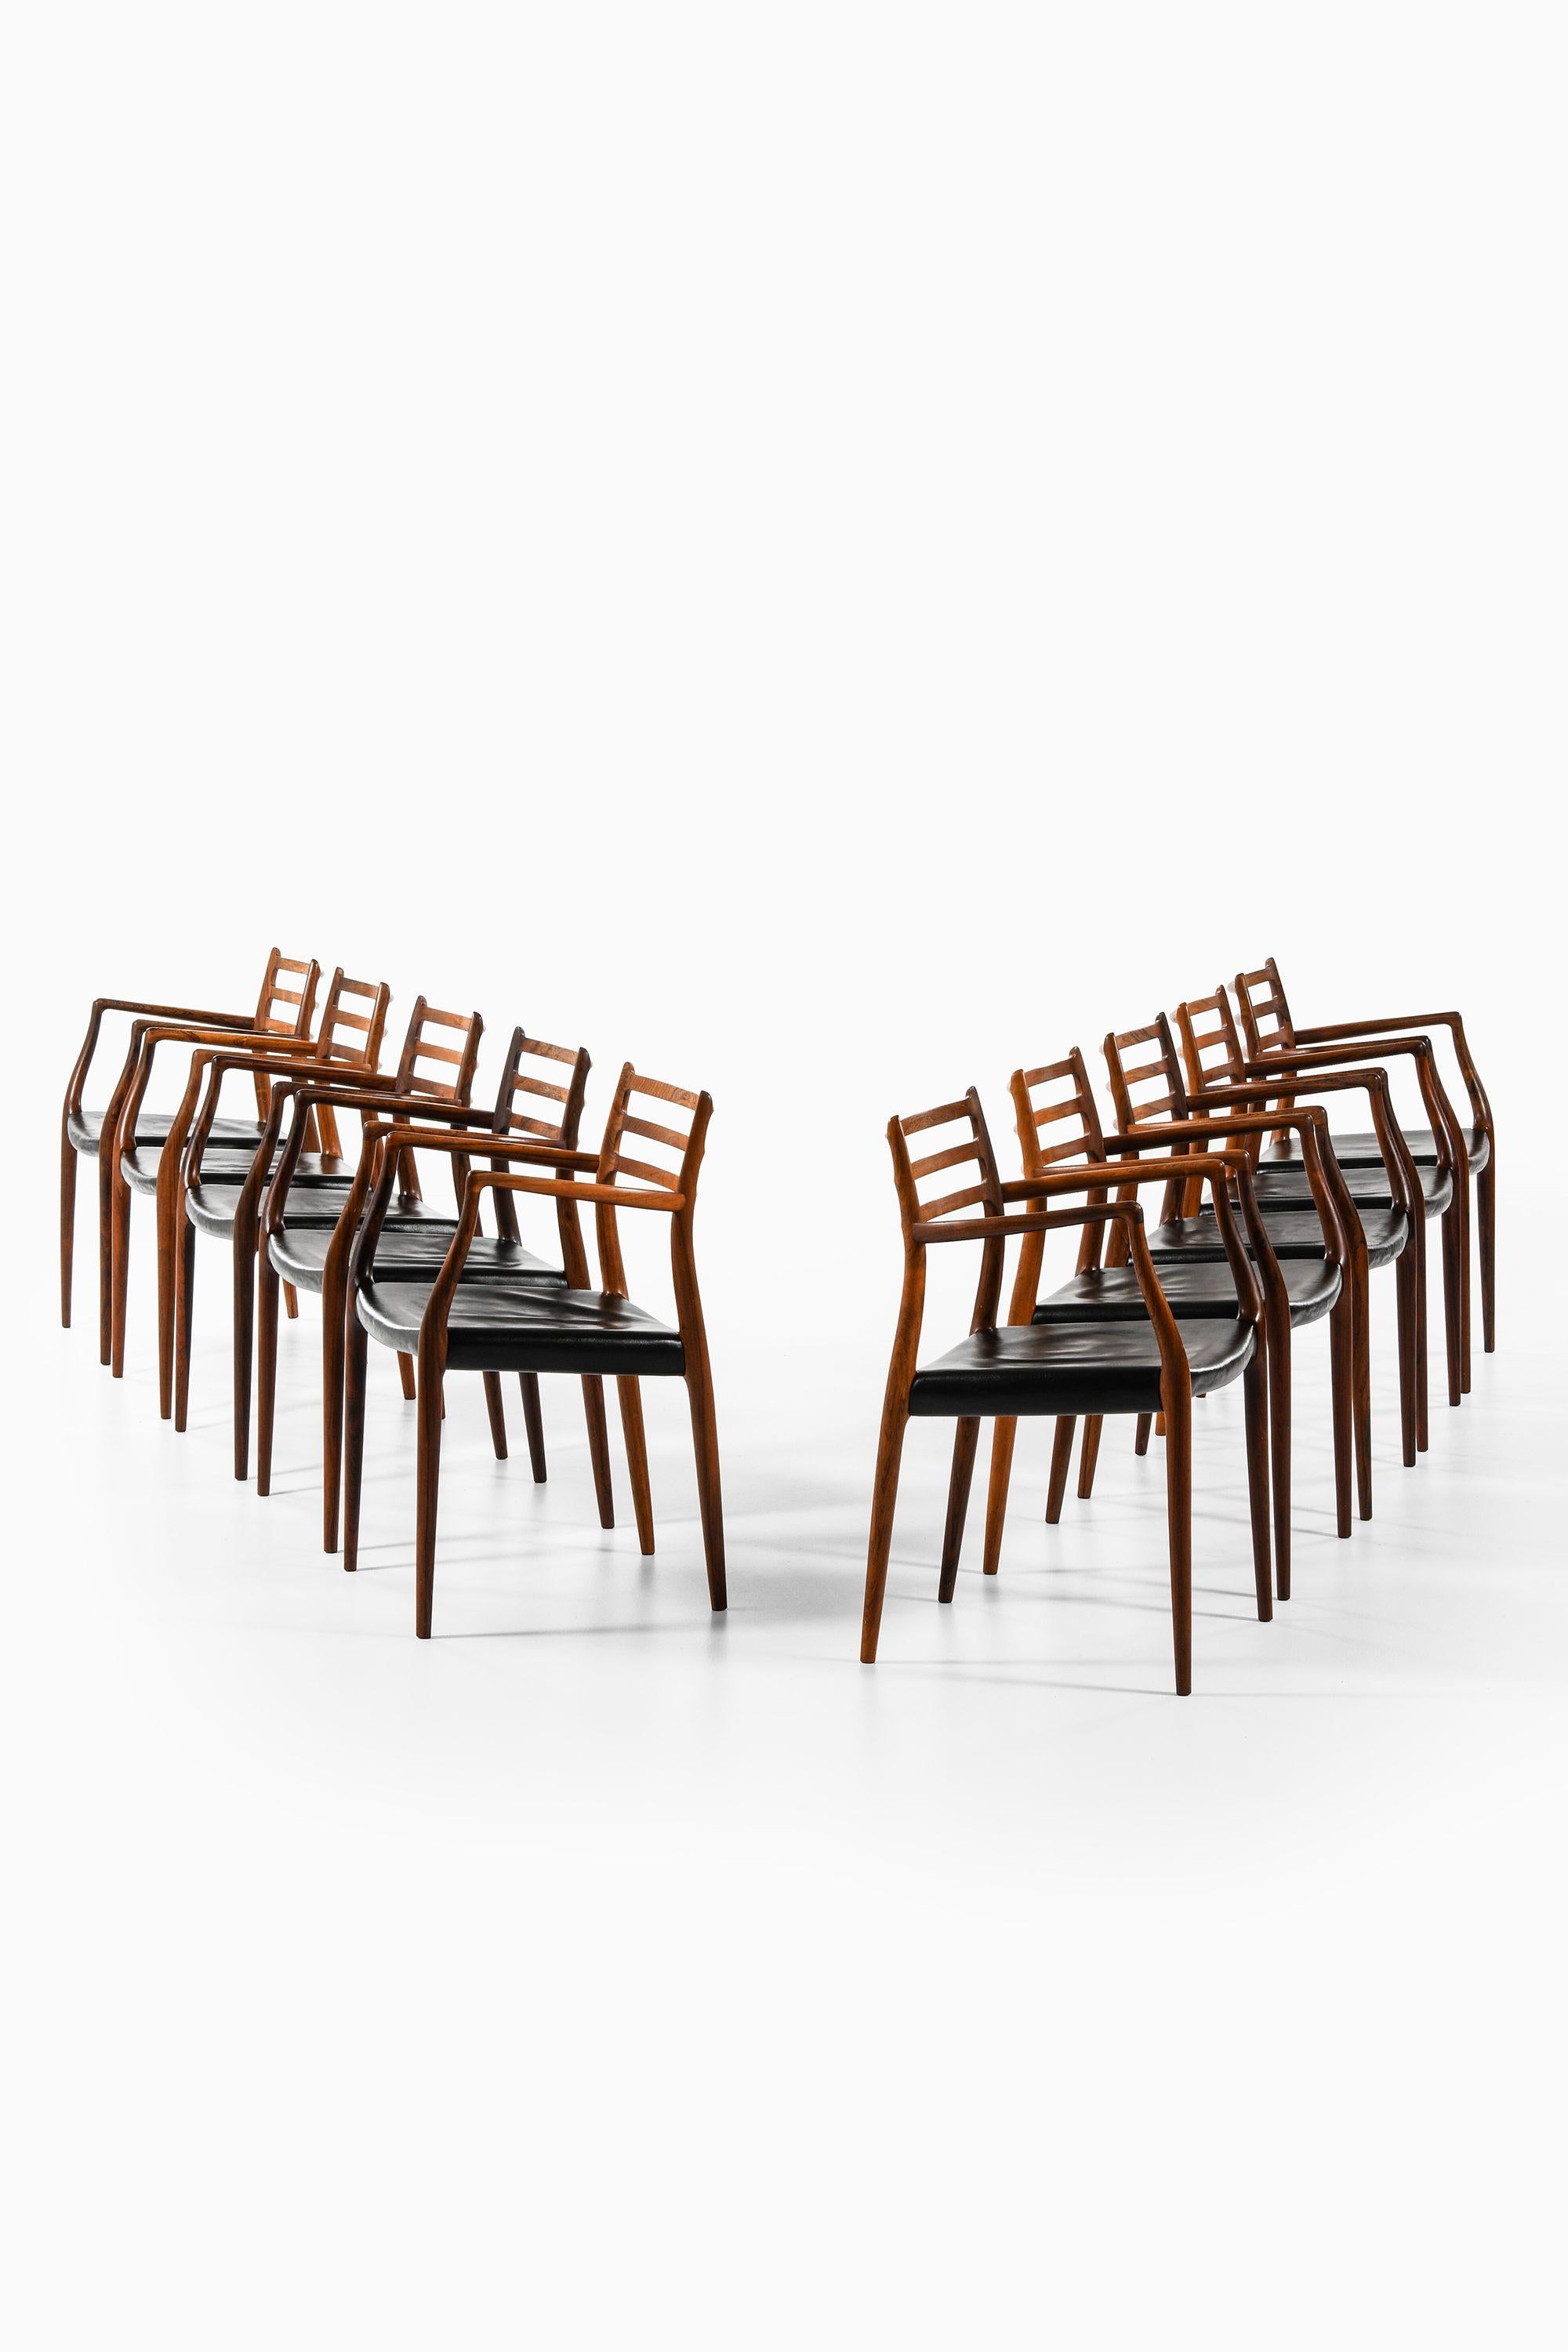 Set of 10 Armchairs in Rosewood and Black Leather by Niels Otto Møller, 1960's In Good Condition For Sale In Limhamn, Skåne län